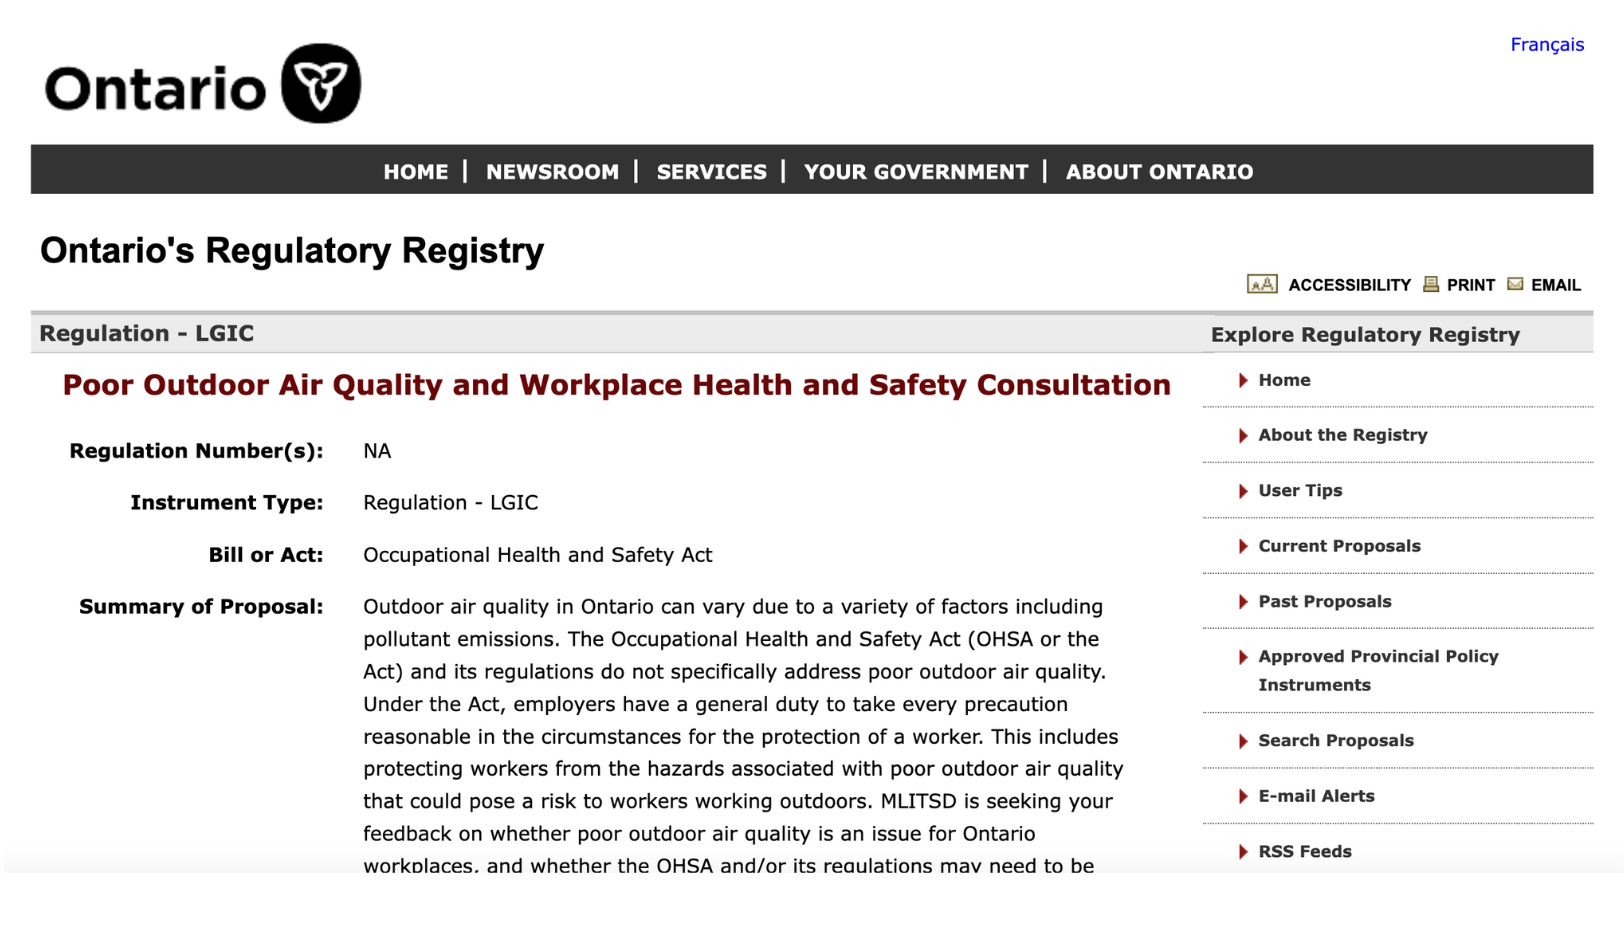 Outdoor Air Quality & Workplace Health & Safety Consultation